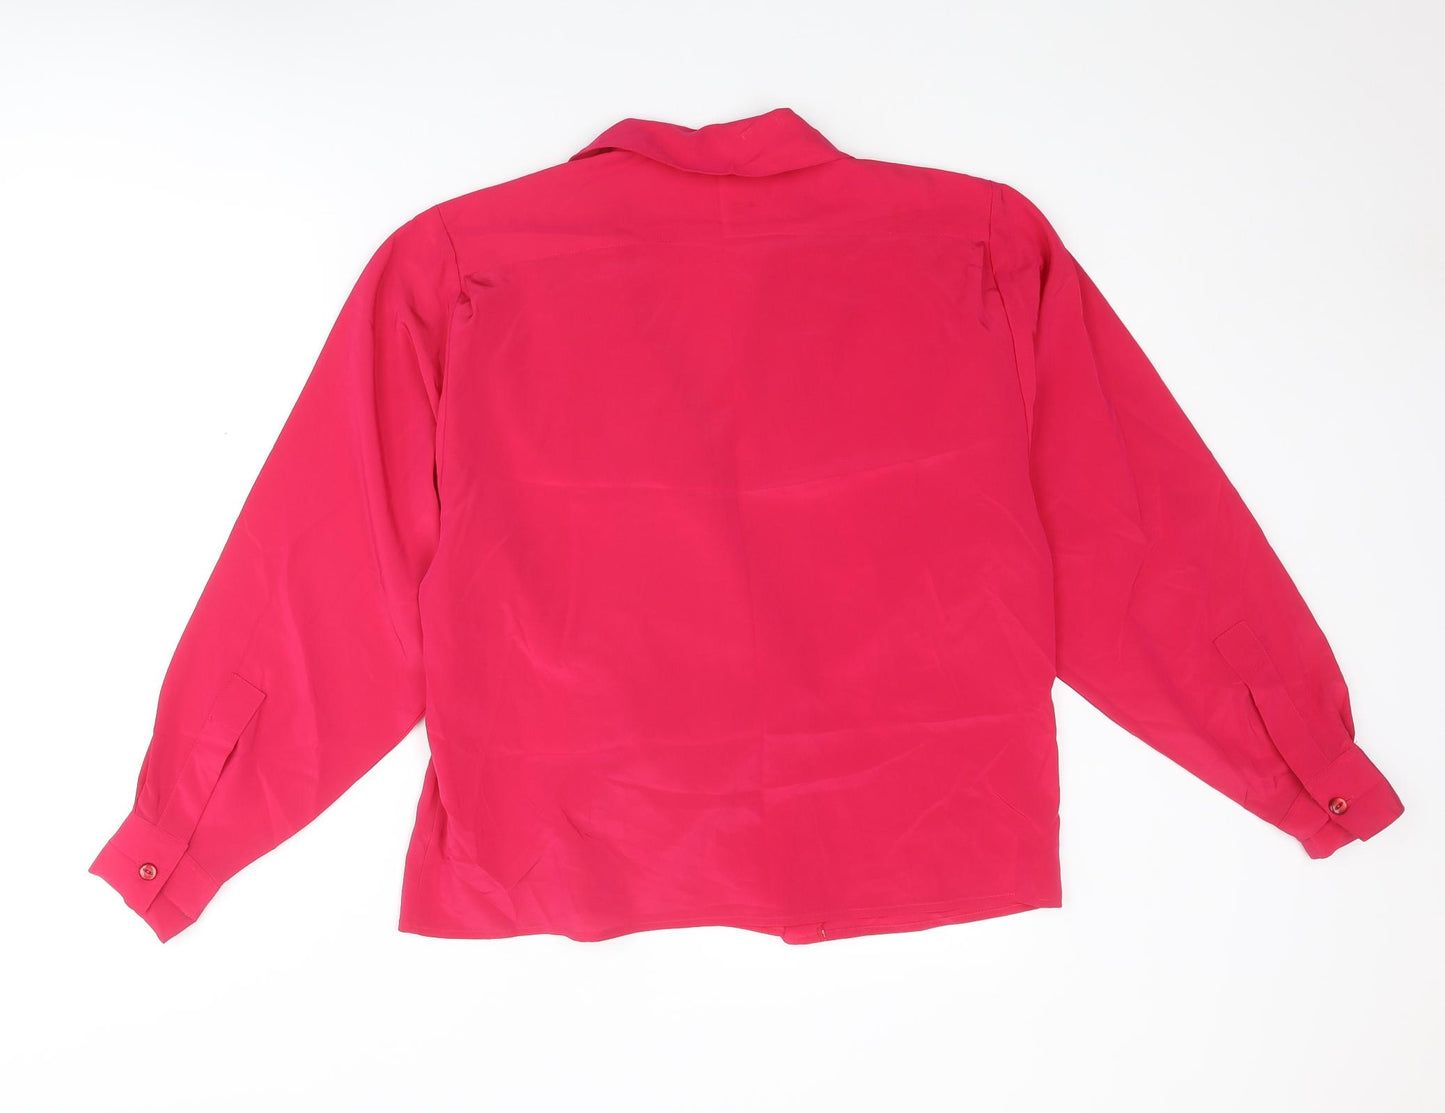 Riva Womens Pink Polyester Basic Blouse Size 12 Collared